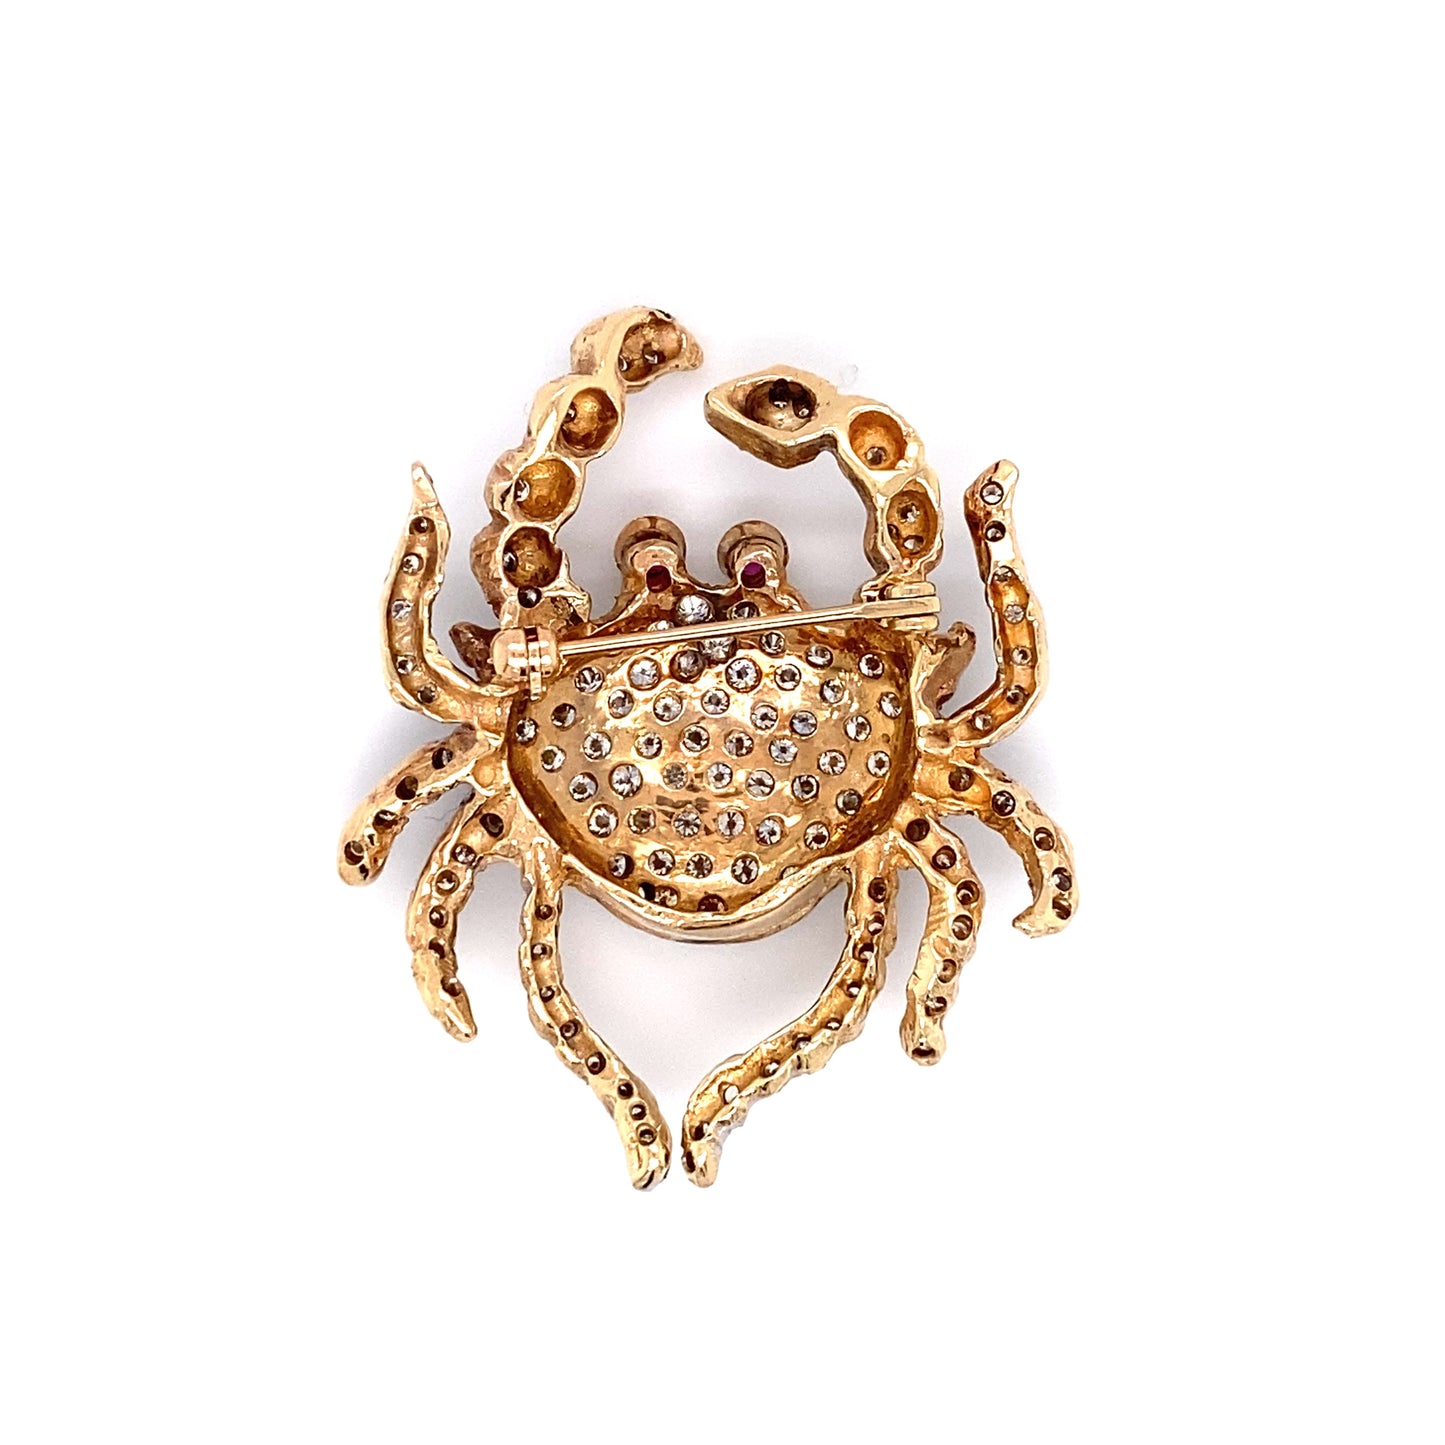 Circa 1960s 2.0 Carat Diamond and Ruby Crab Brooch in Platinum and 14K Gold